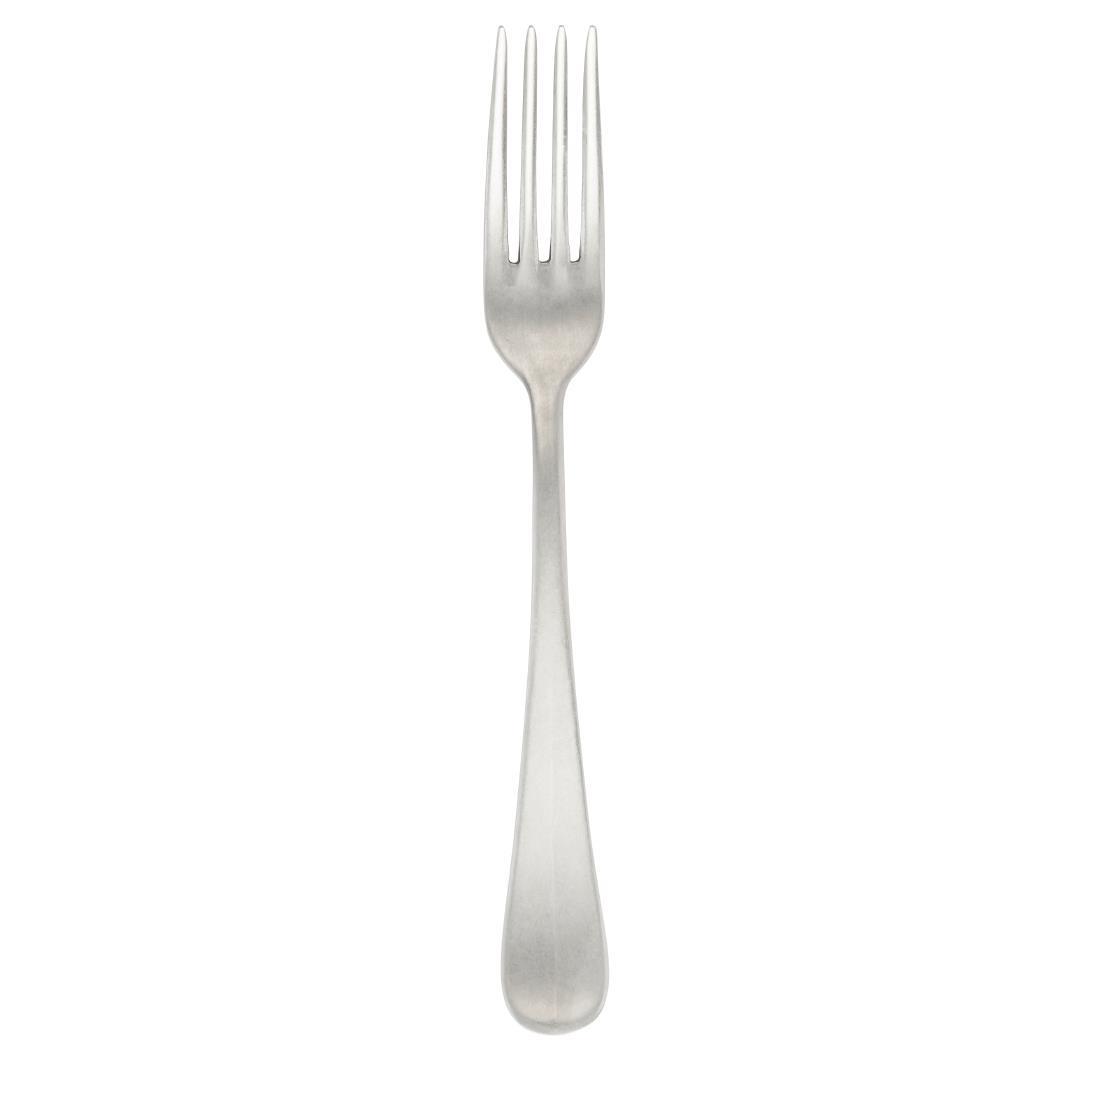 Pintinox Baguette Stonewashed Table Fork (Pack of 12) - GN781  - 2